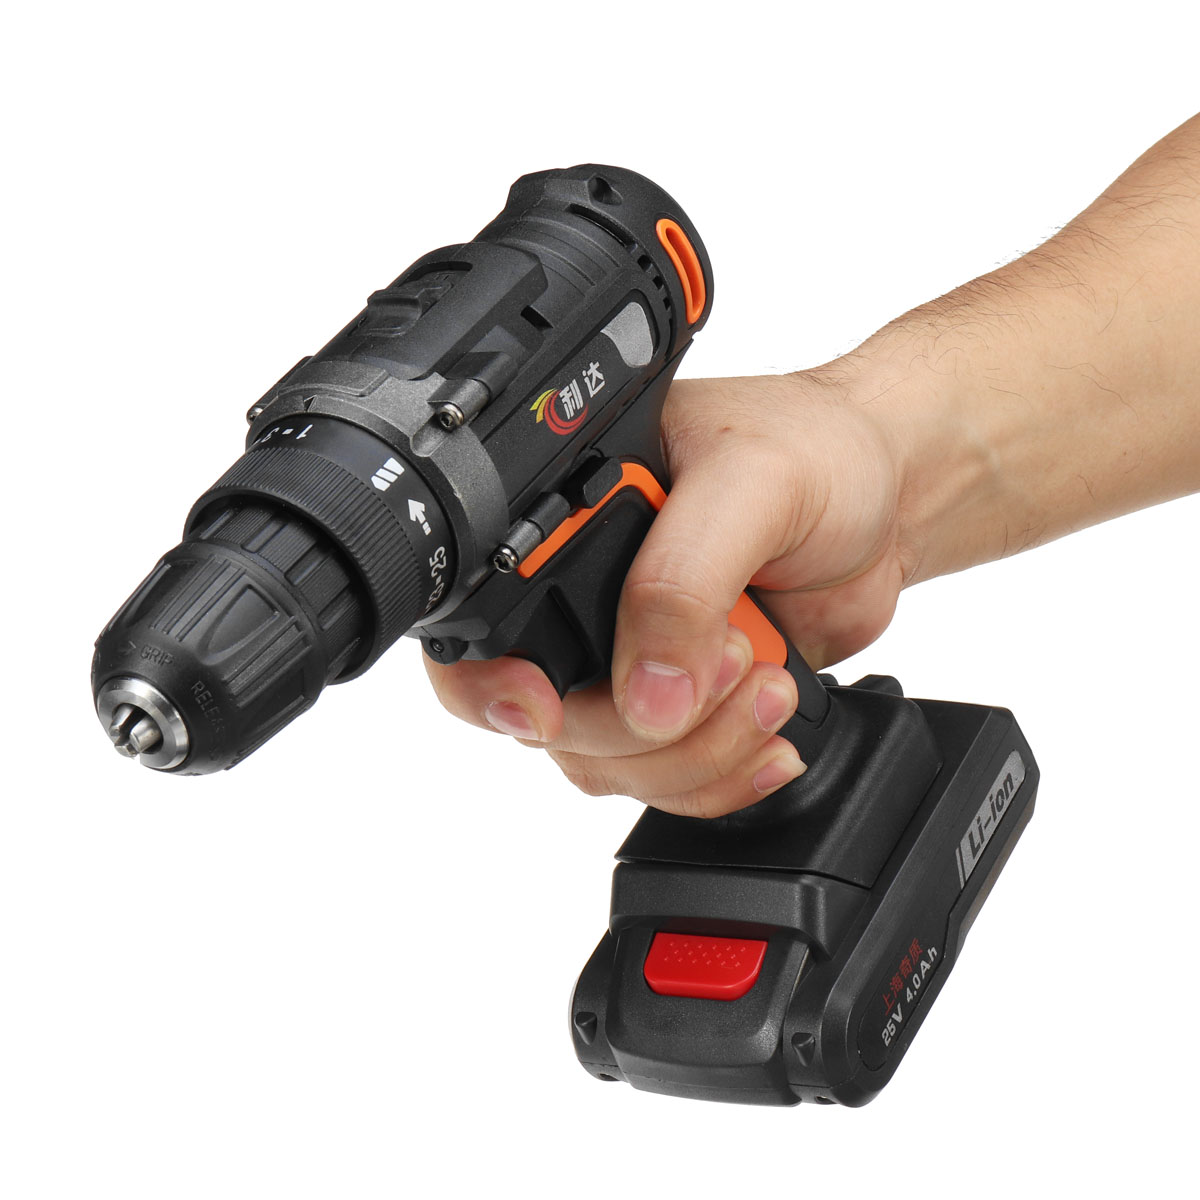 25V-4000mAh-Cordless-Rechargeable-Power-Drill-Driver-Electric-Screwdriver-with-2-Li-ion-Batteries-1396031